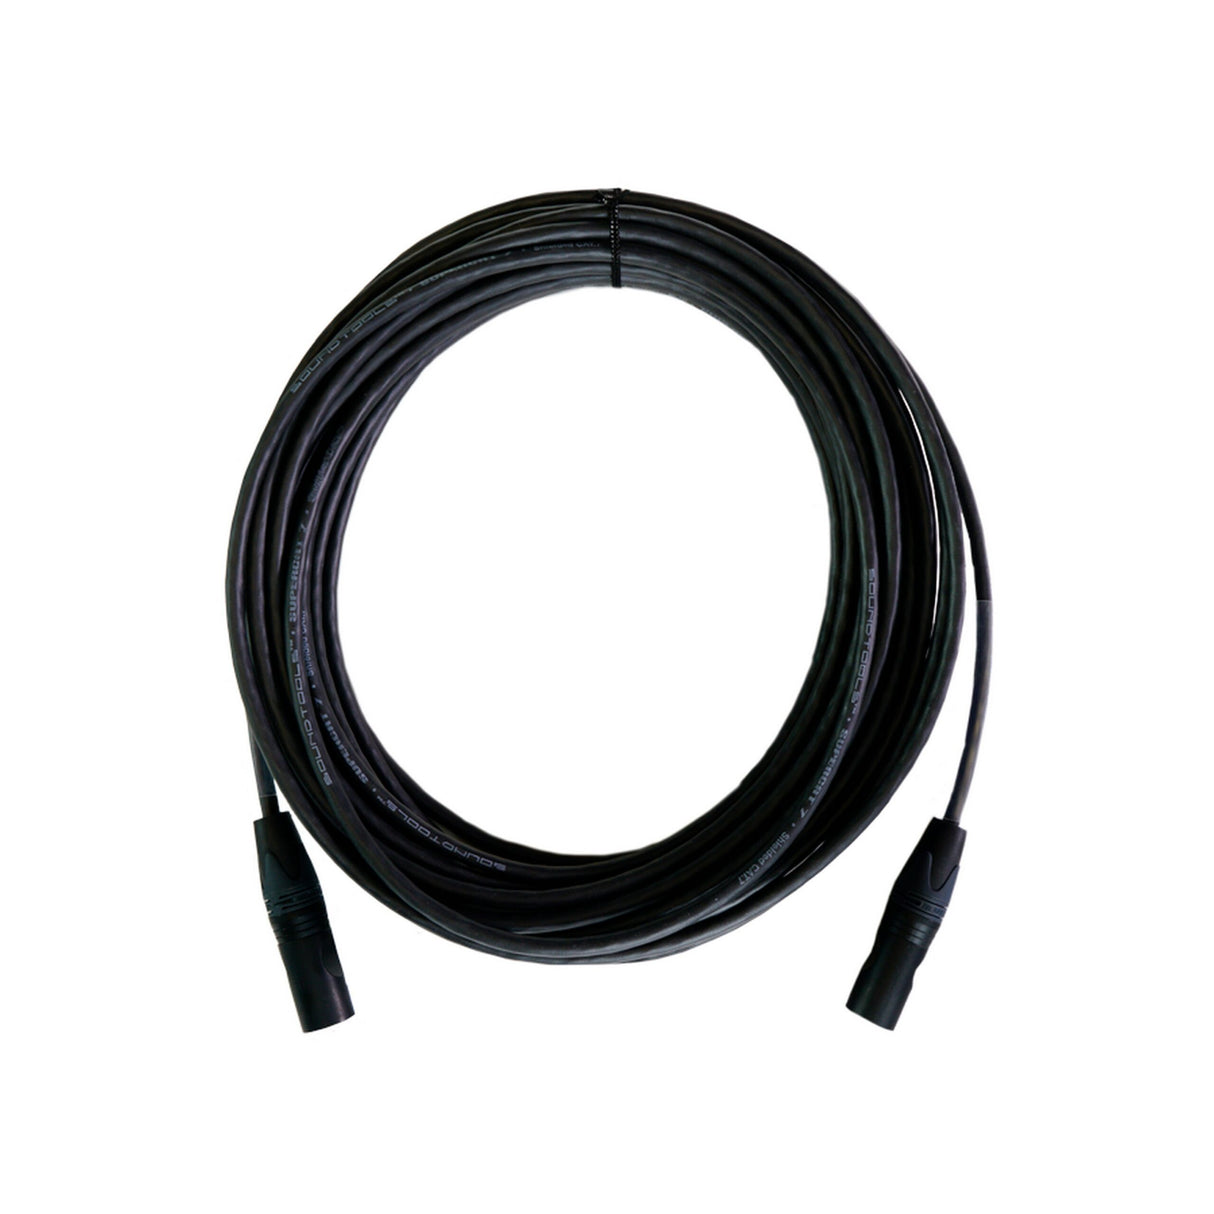 SoundTools SuperCAT 7 etherCON to etherCON CAT 7 Cable, 3-Foot Black